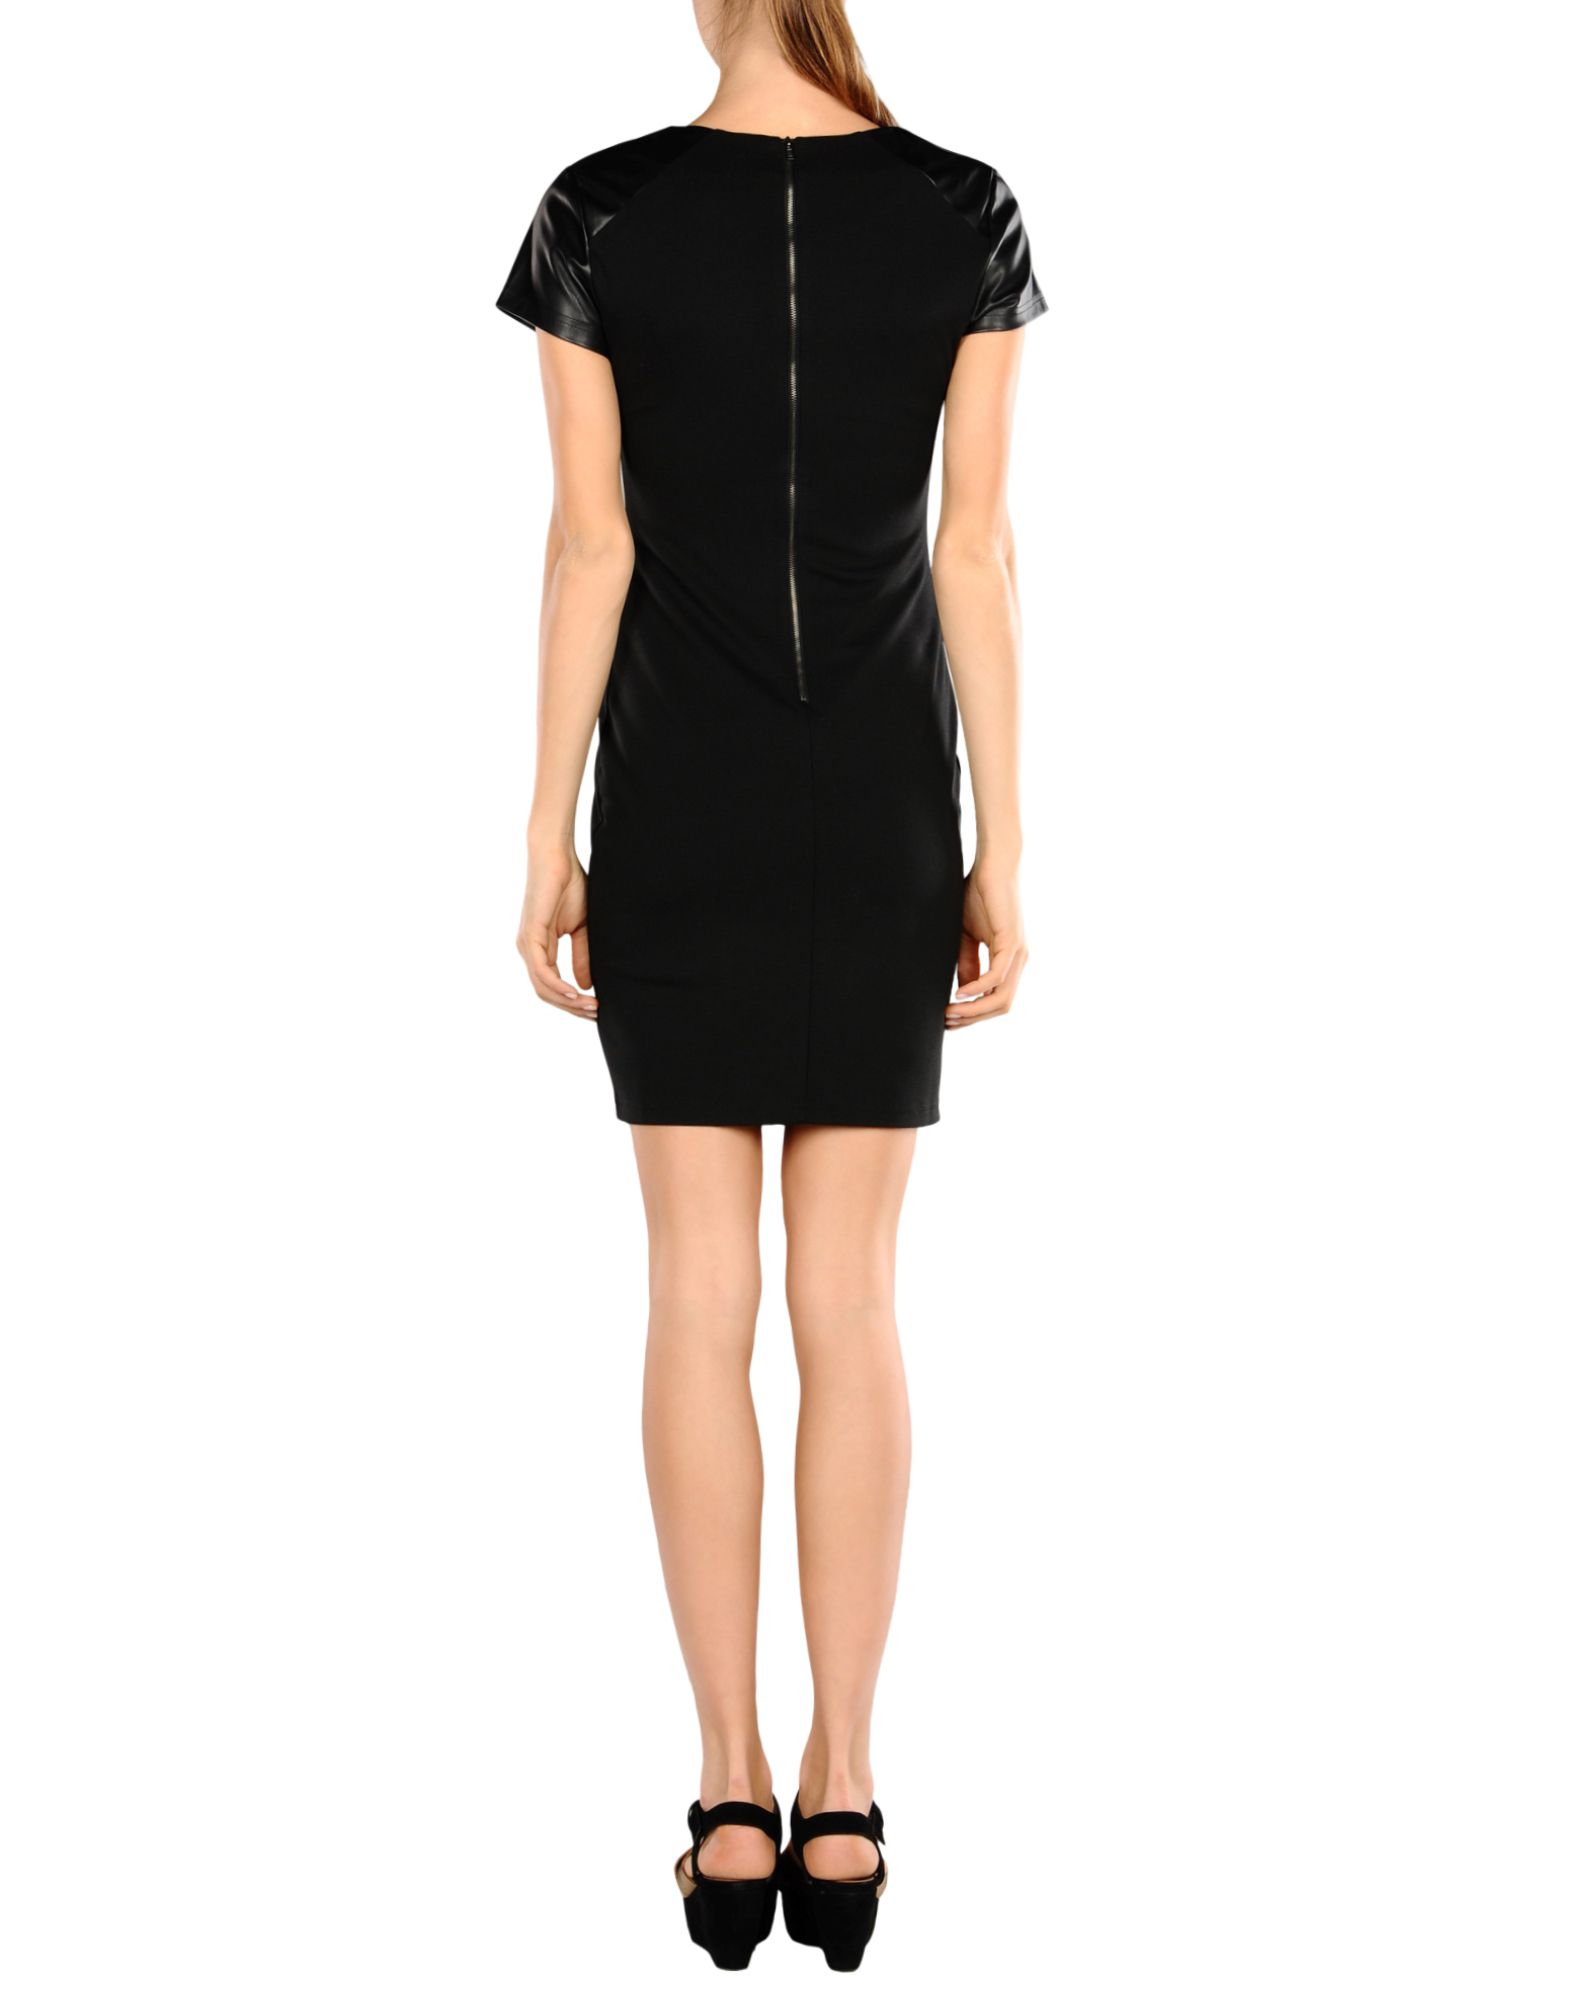 Lyst - Earth couture Short Dress in Black